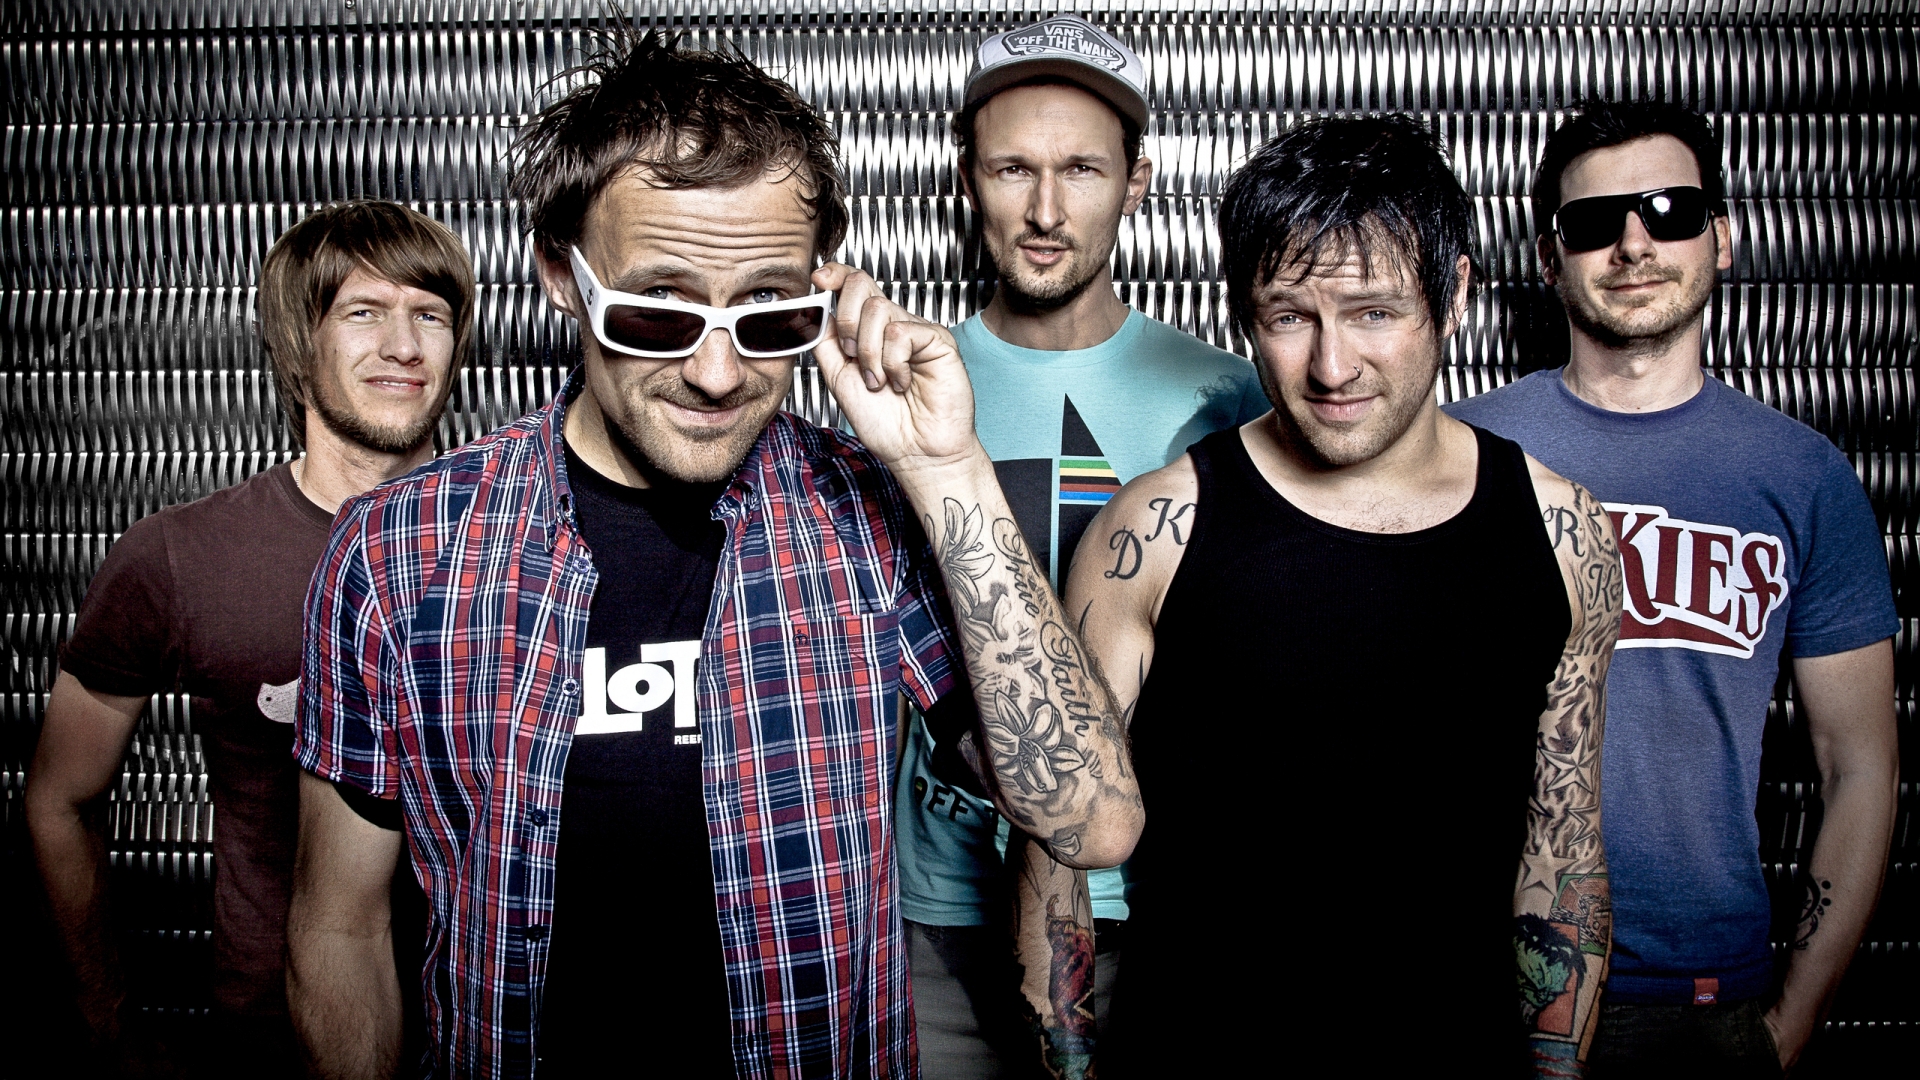 Donots for 1920 x 1080 HDTV 1080p resolution